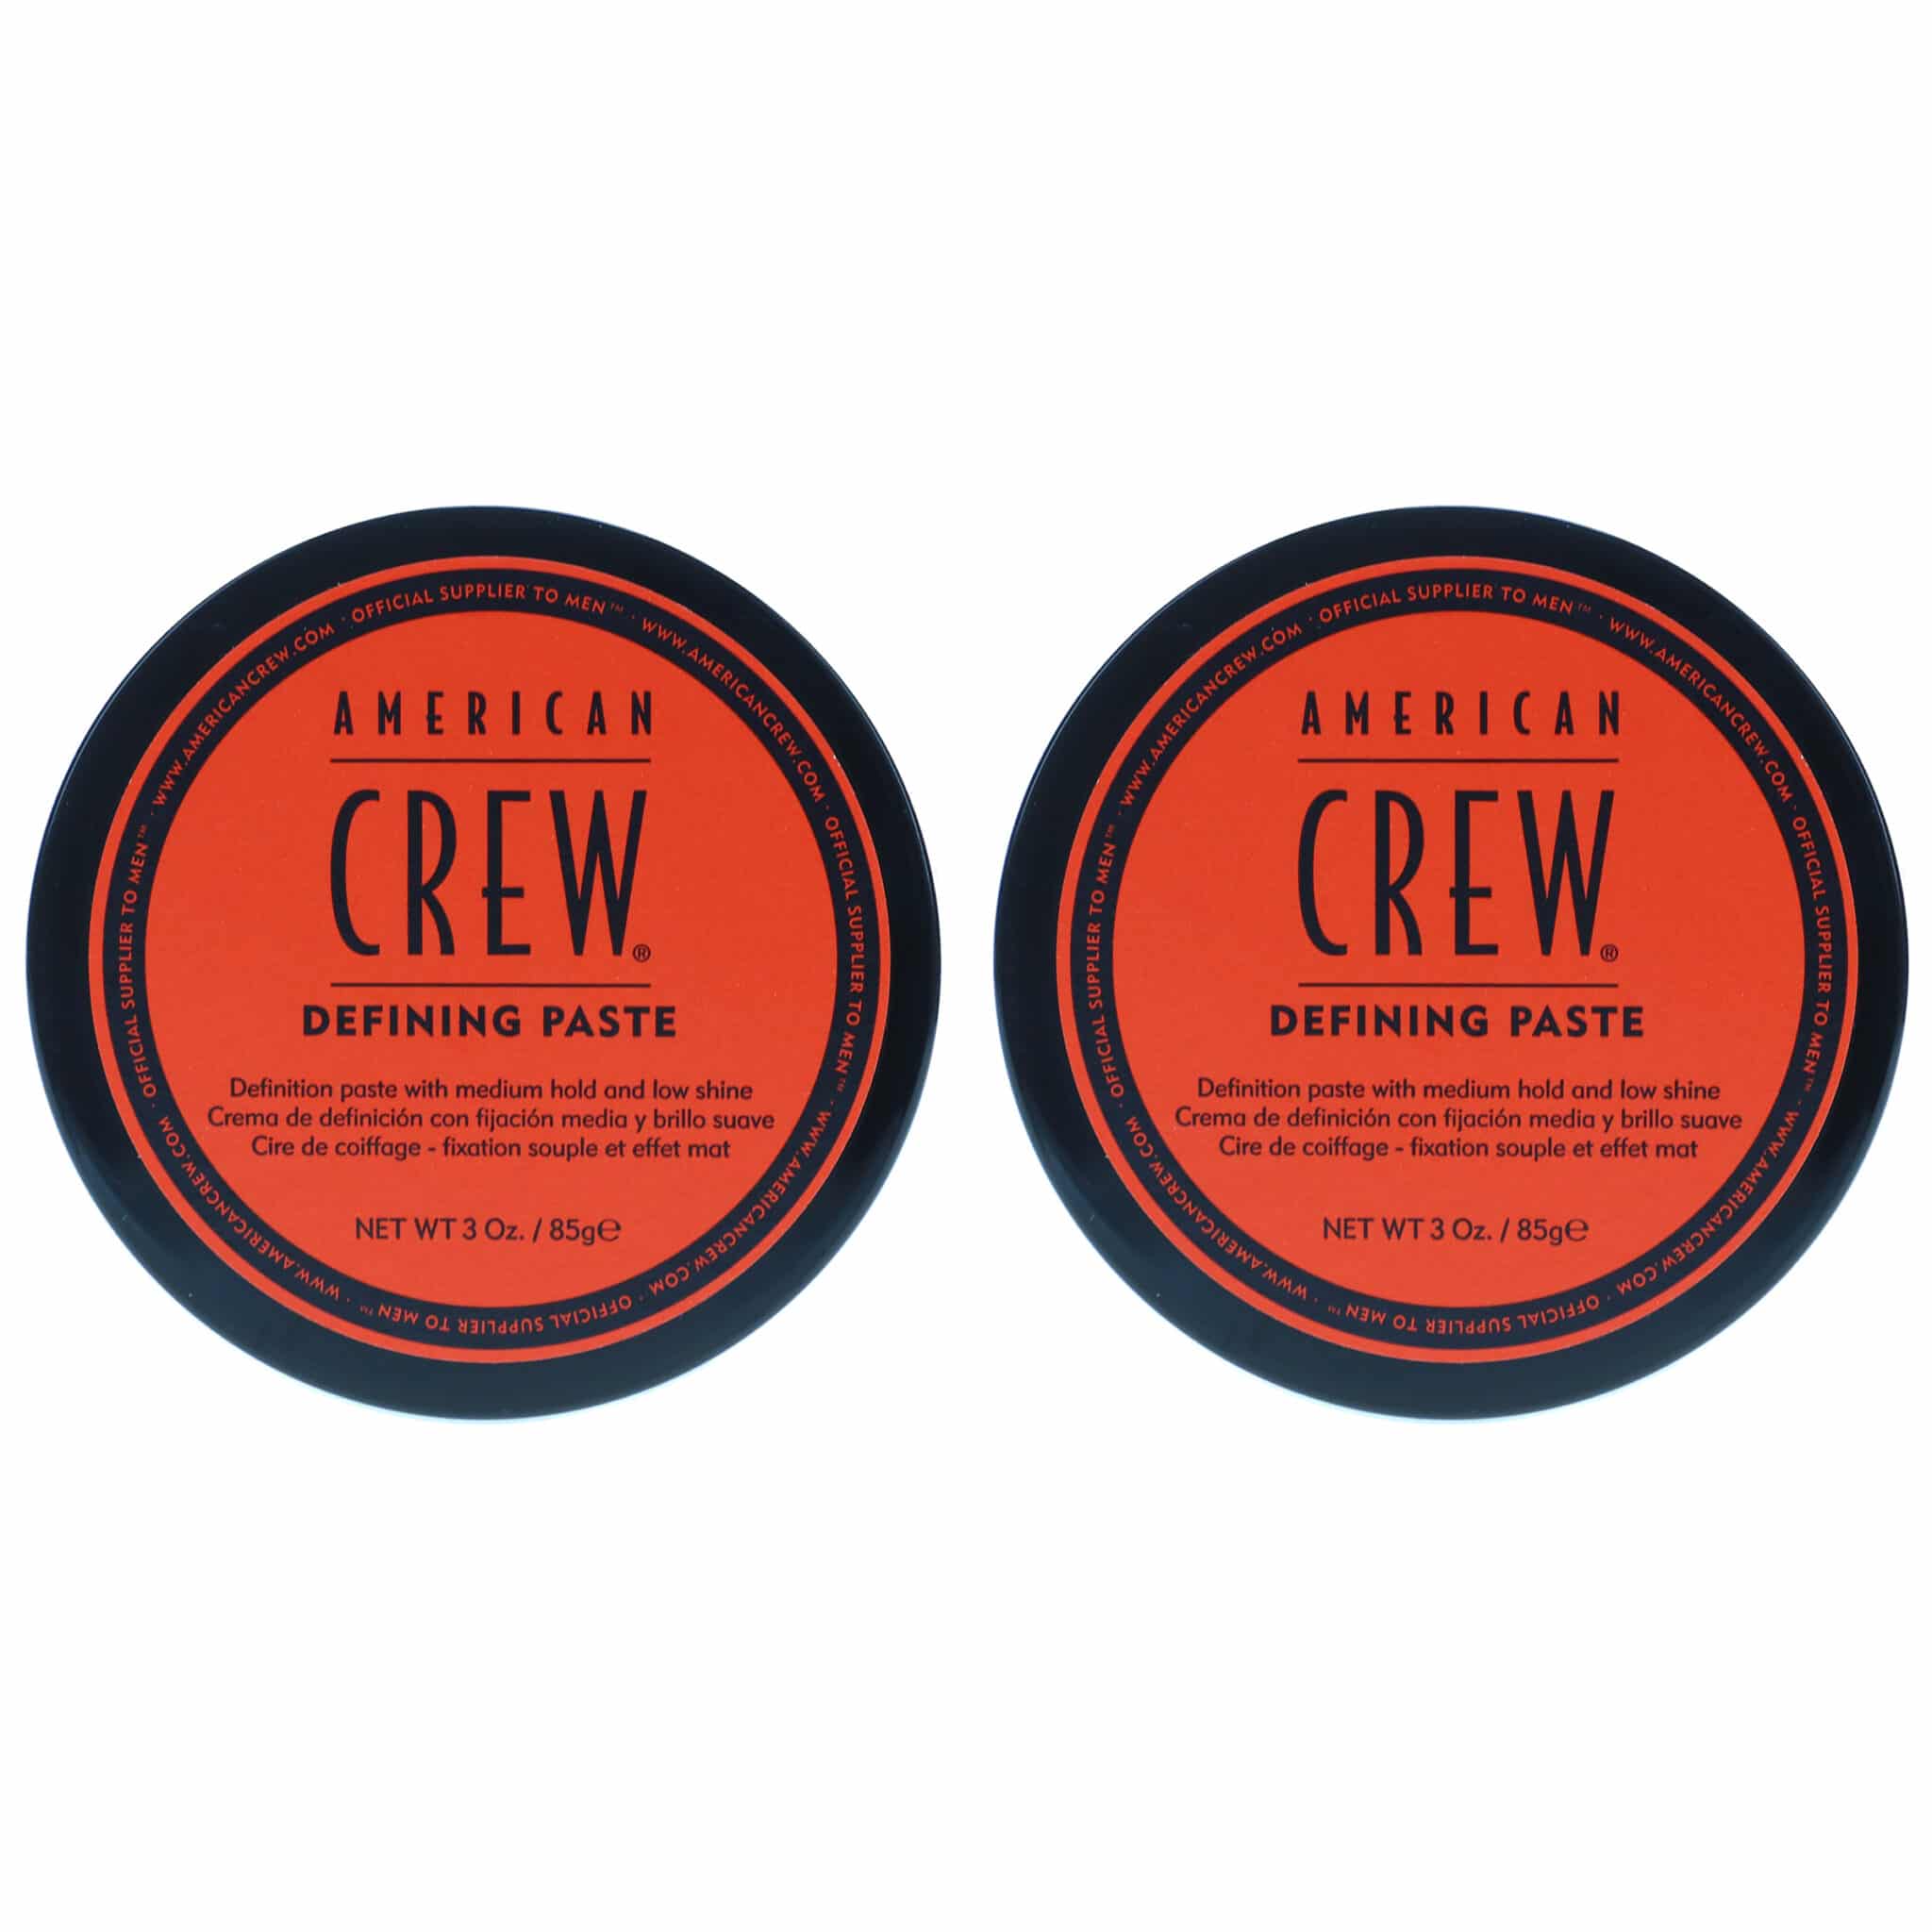 American Crew Defining Paste 3 oz 2 Pack | LaLa Daisy